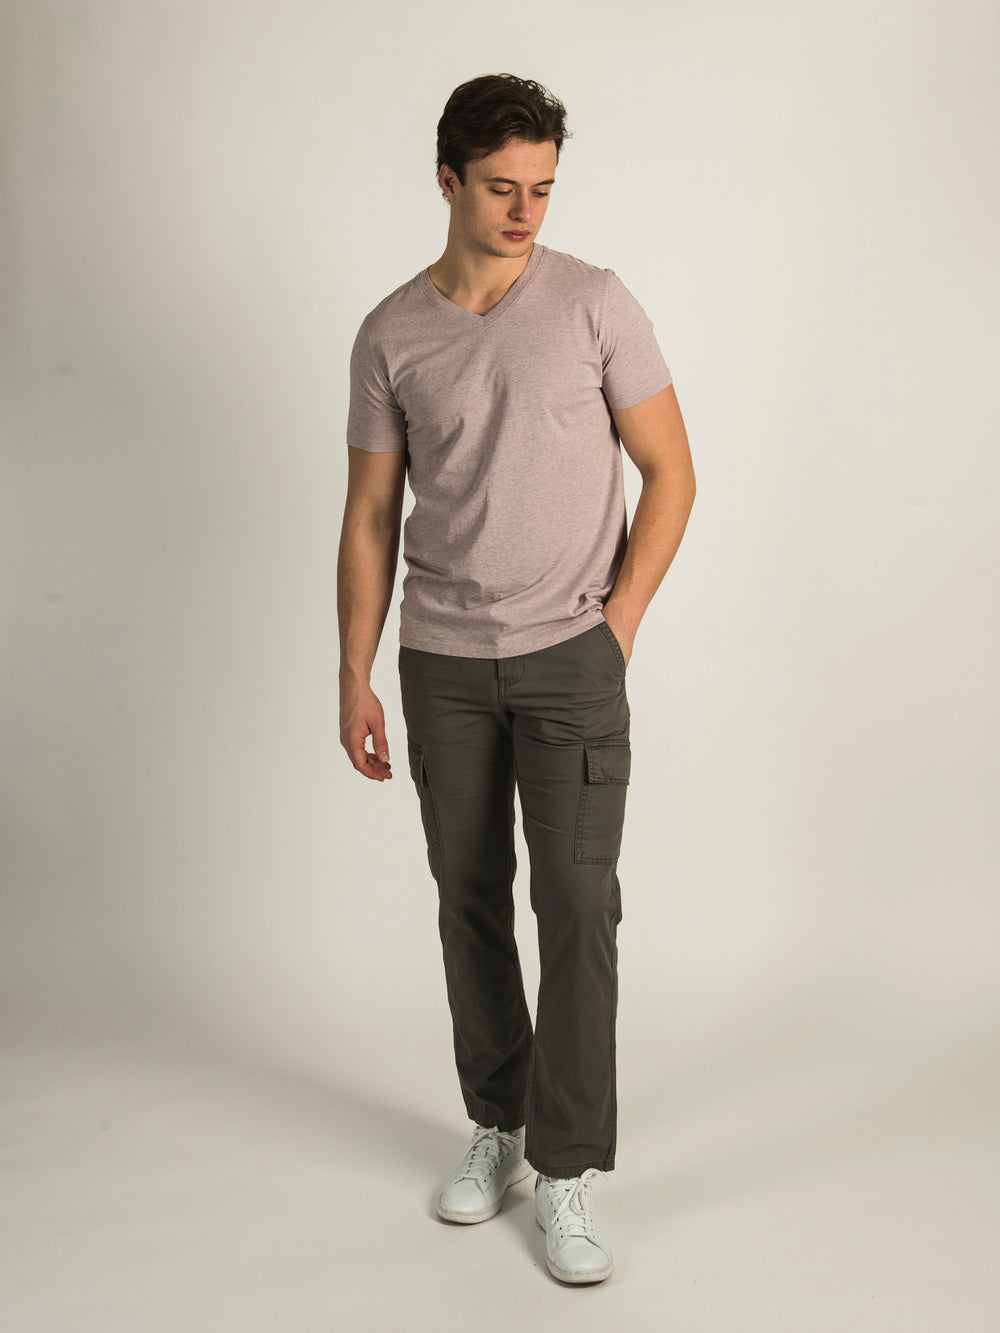 TAINTED BOWEN CARGO PANT  - CLEARANCE